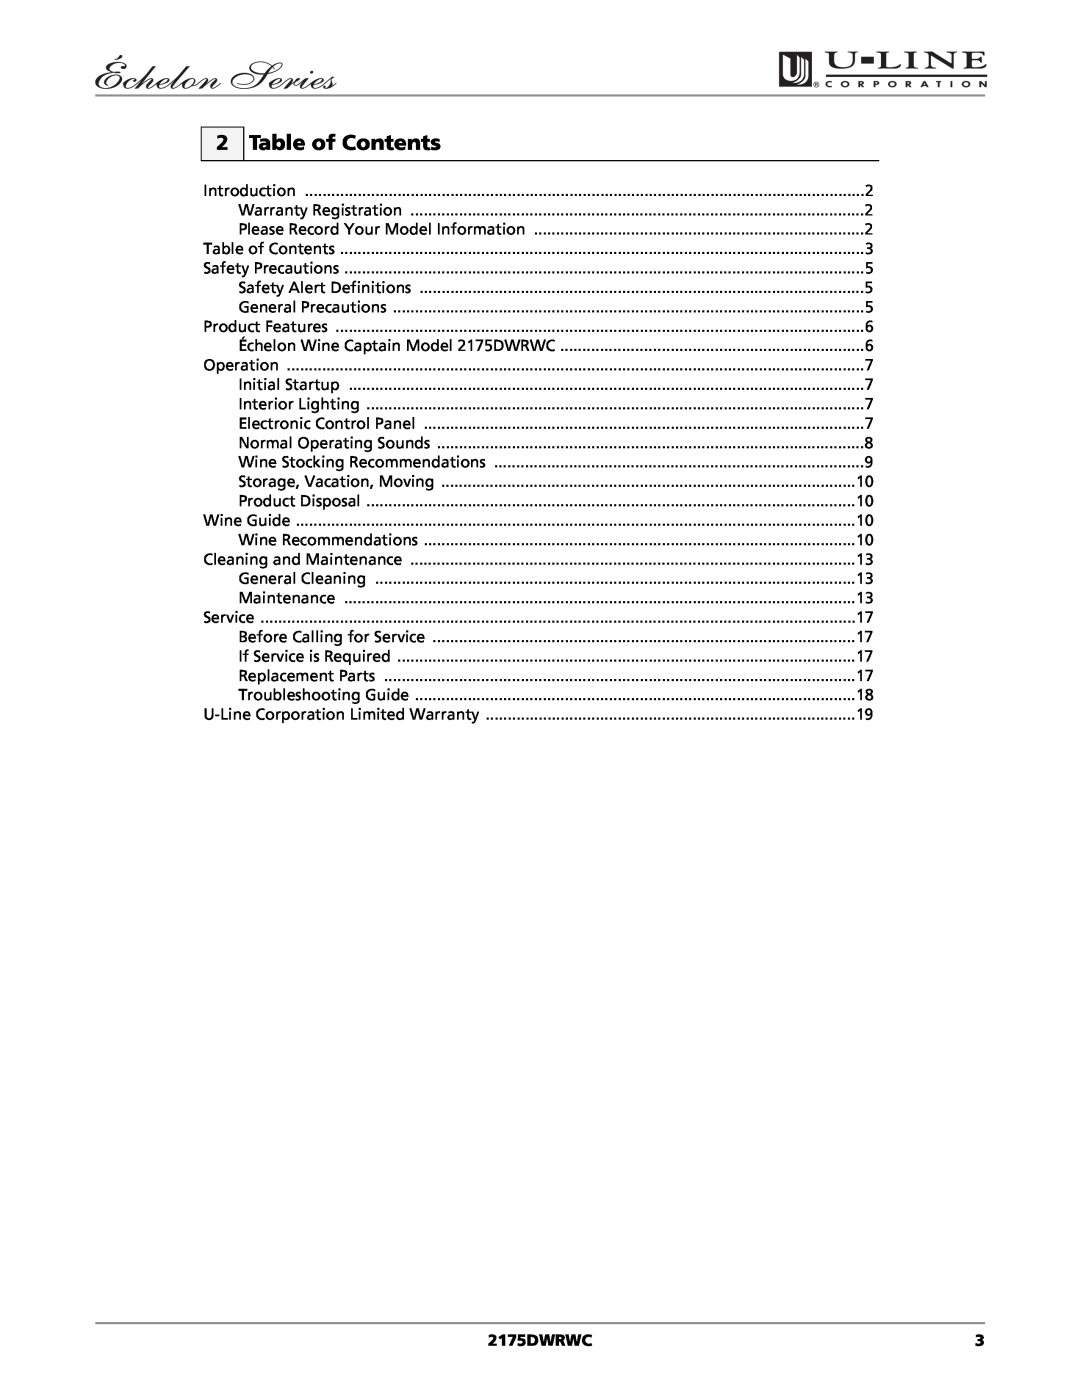 U-Line 2175DWRWC manual Table of Contents 